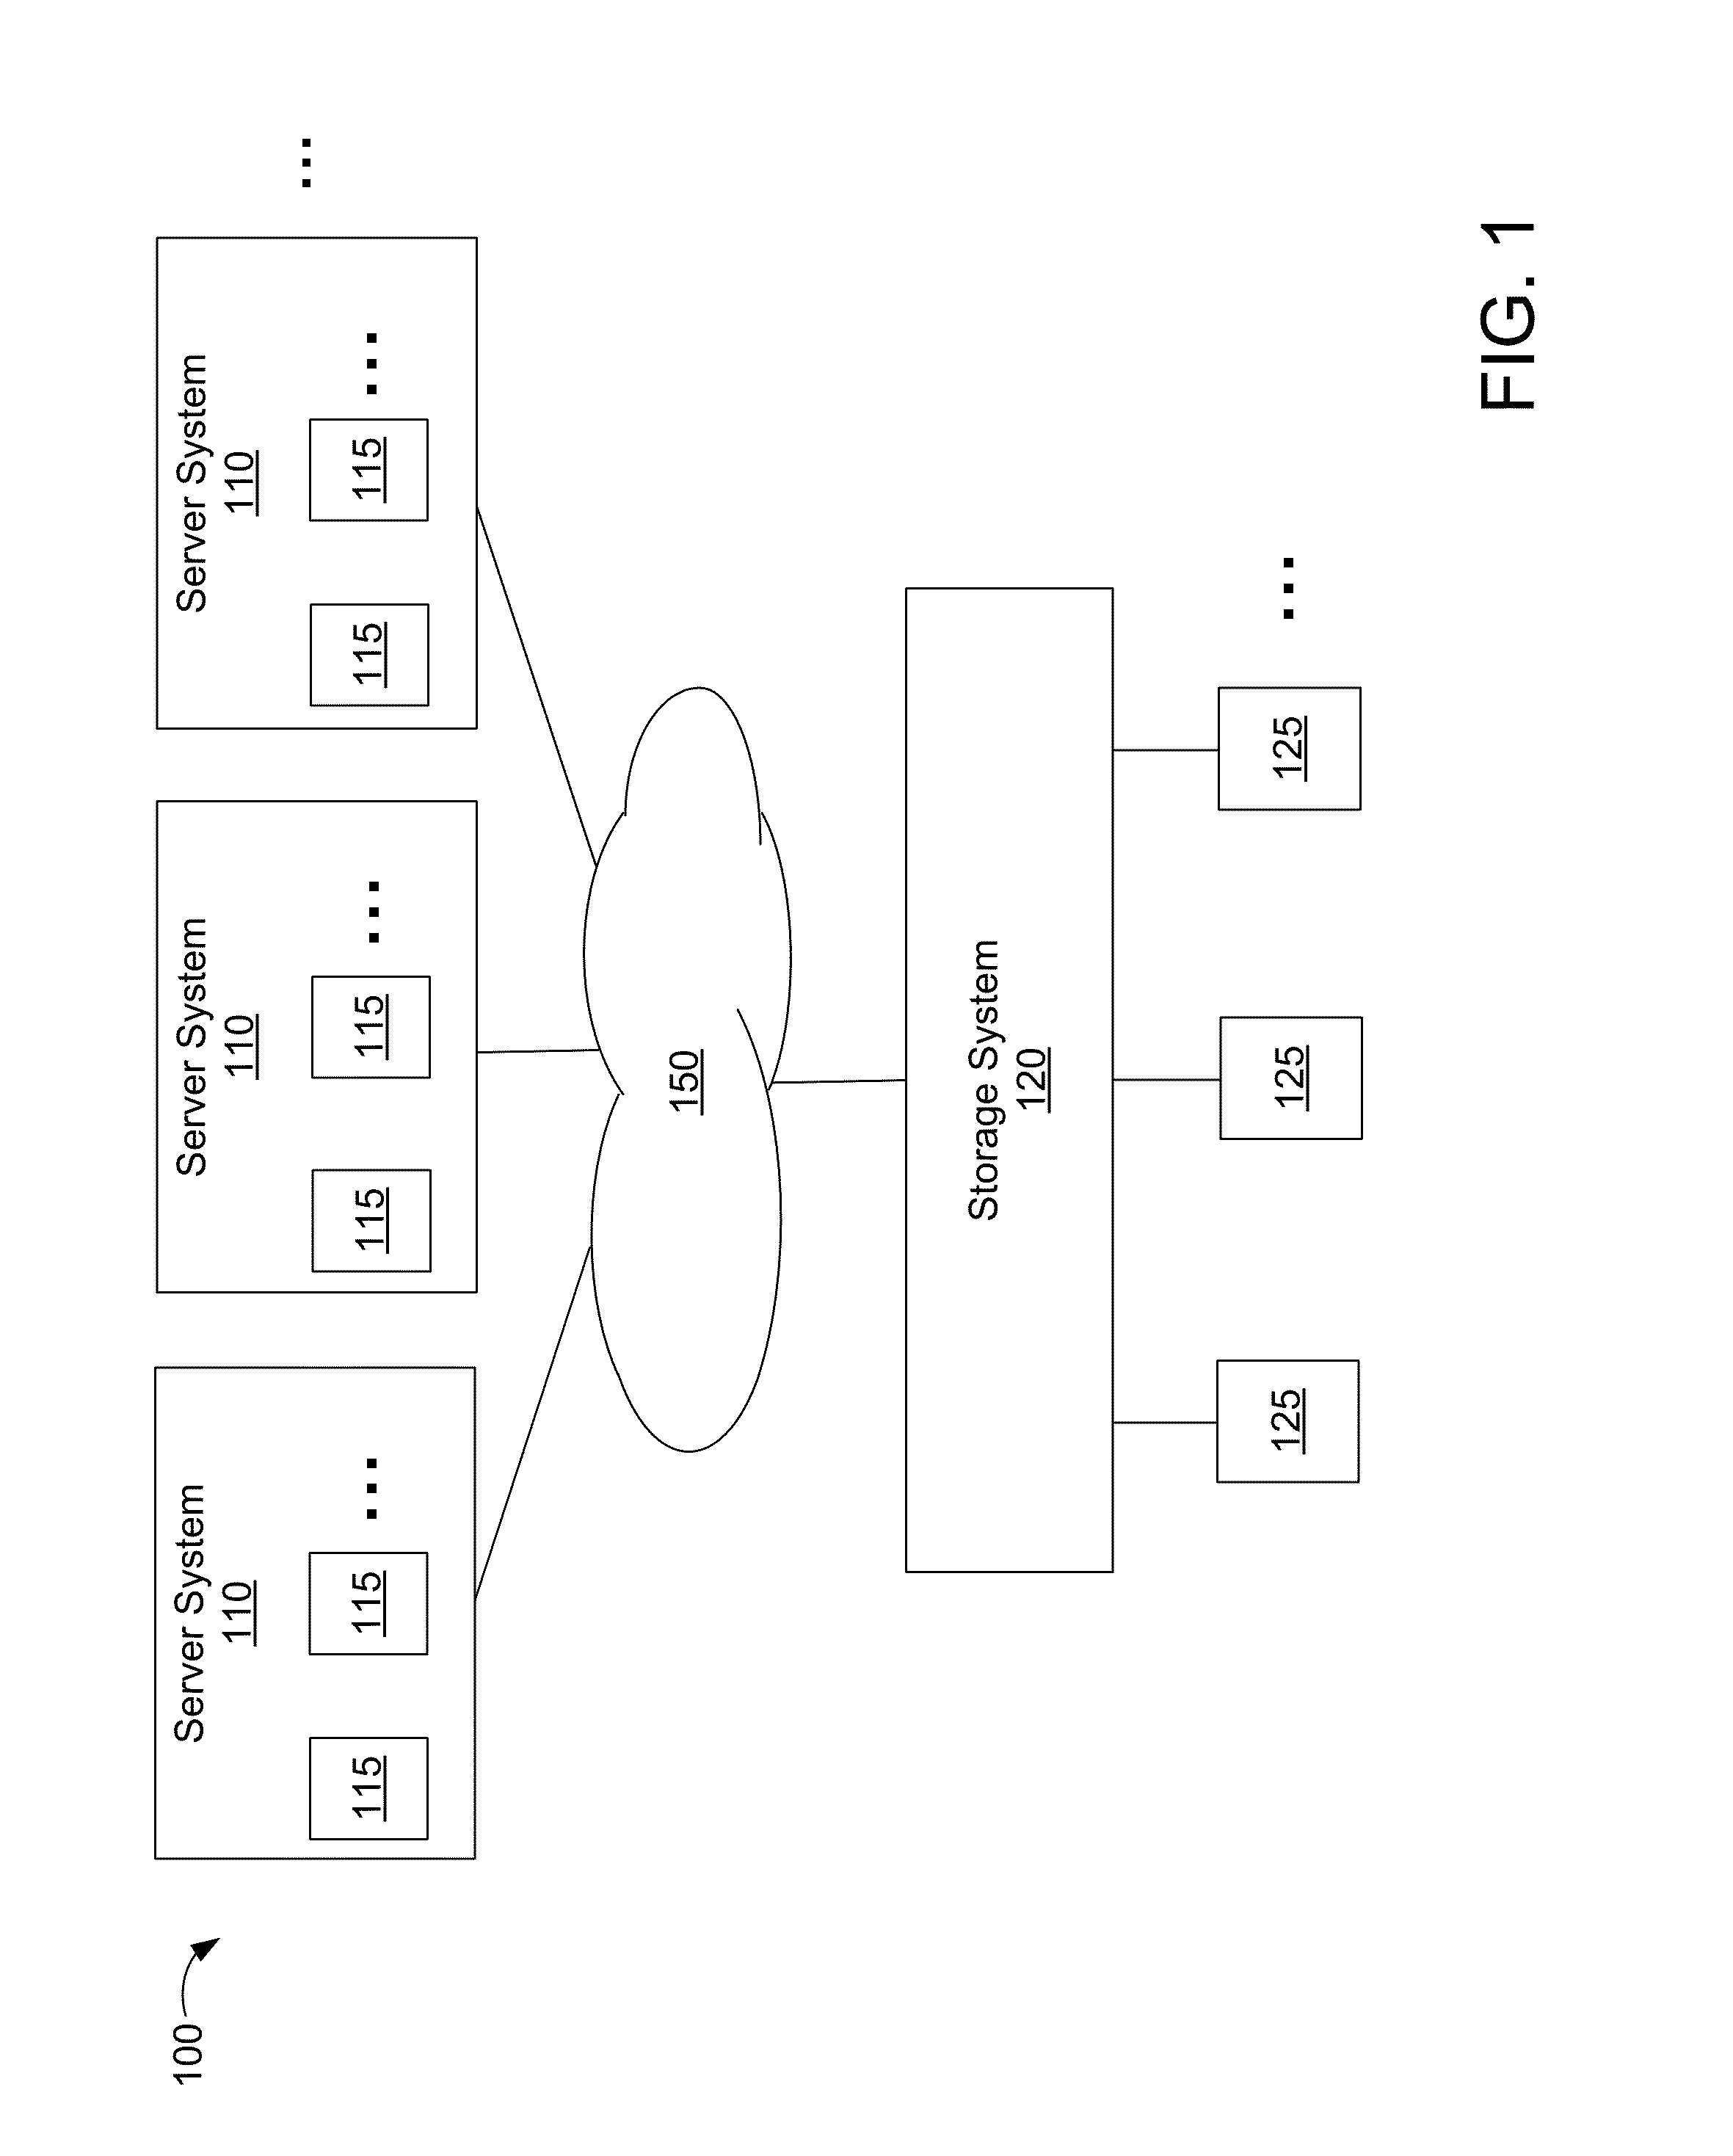 System and methods for mitigating write emulation on a disk device using cache memory